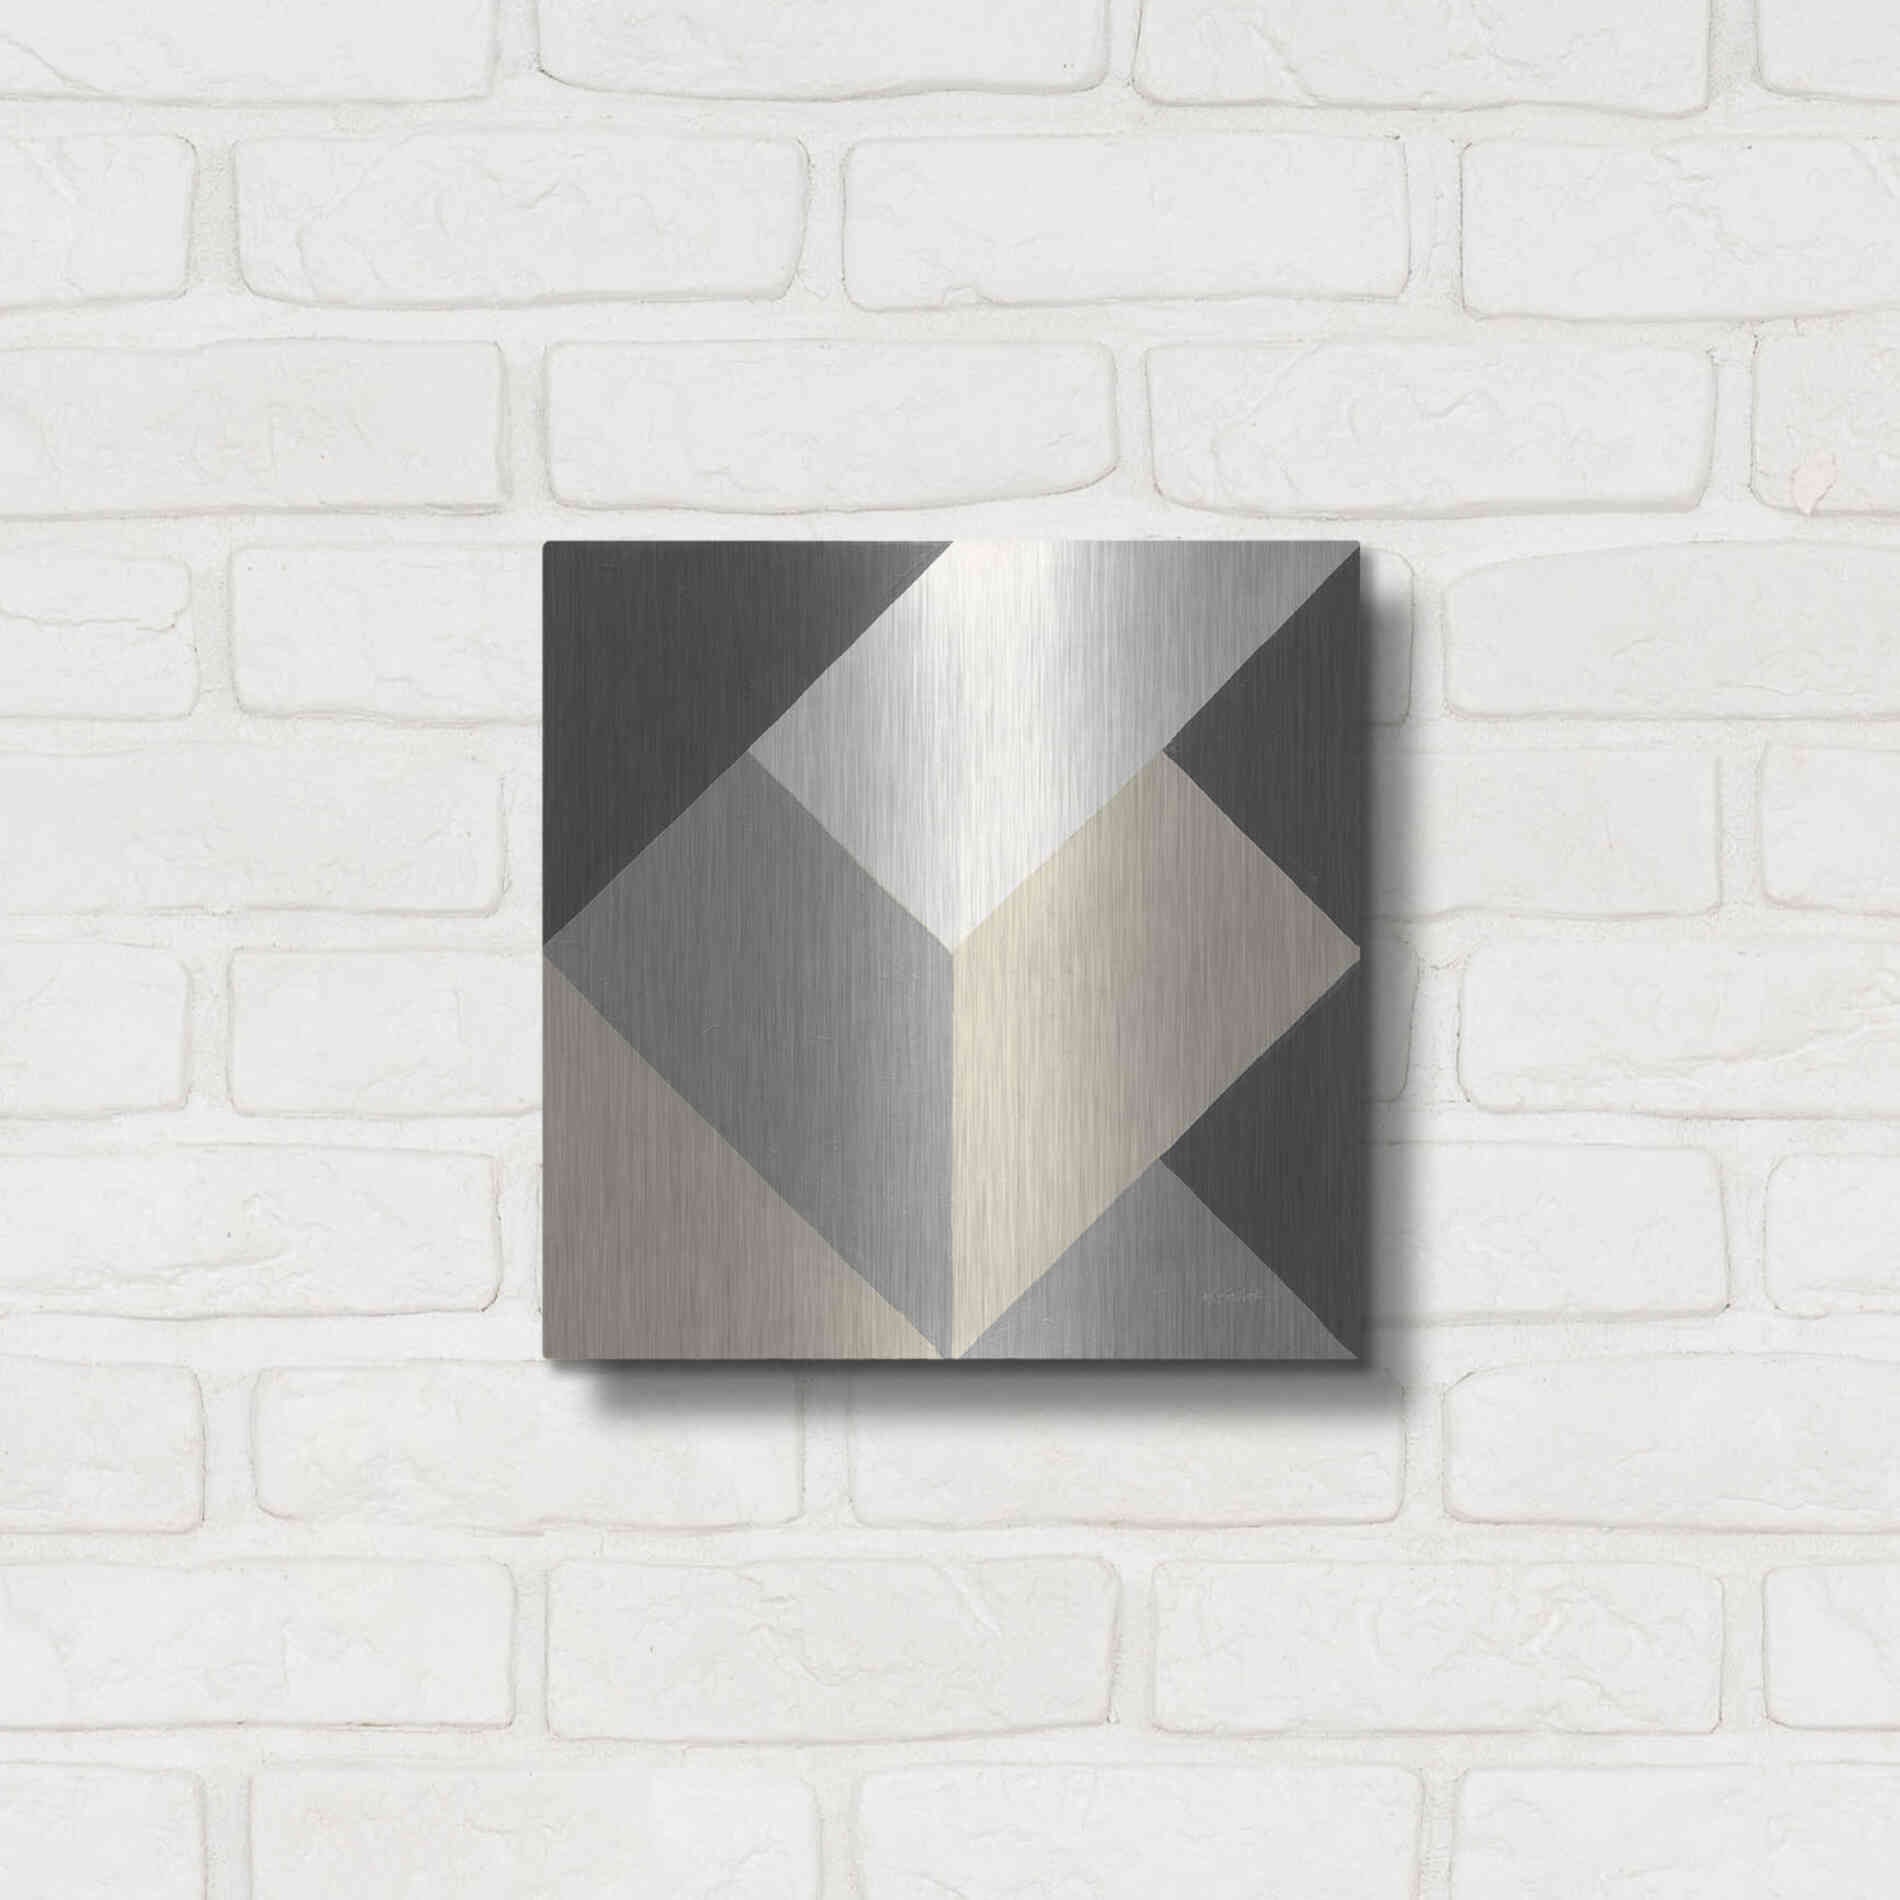 Luxe Metal Art 'Triangles I Neutral Crop' by Mike Schick, Metal Wall Art,12x12